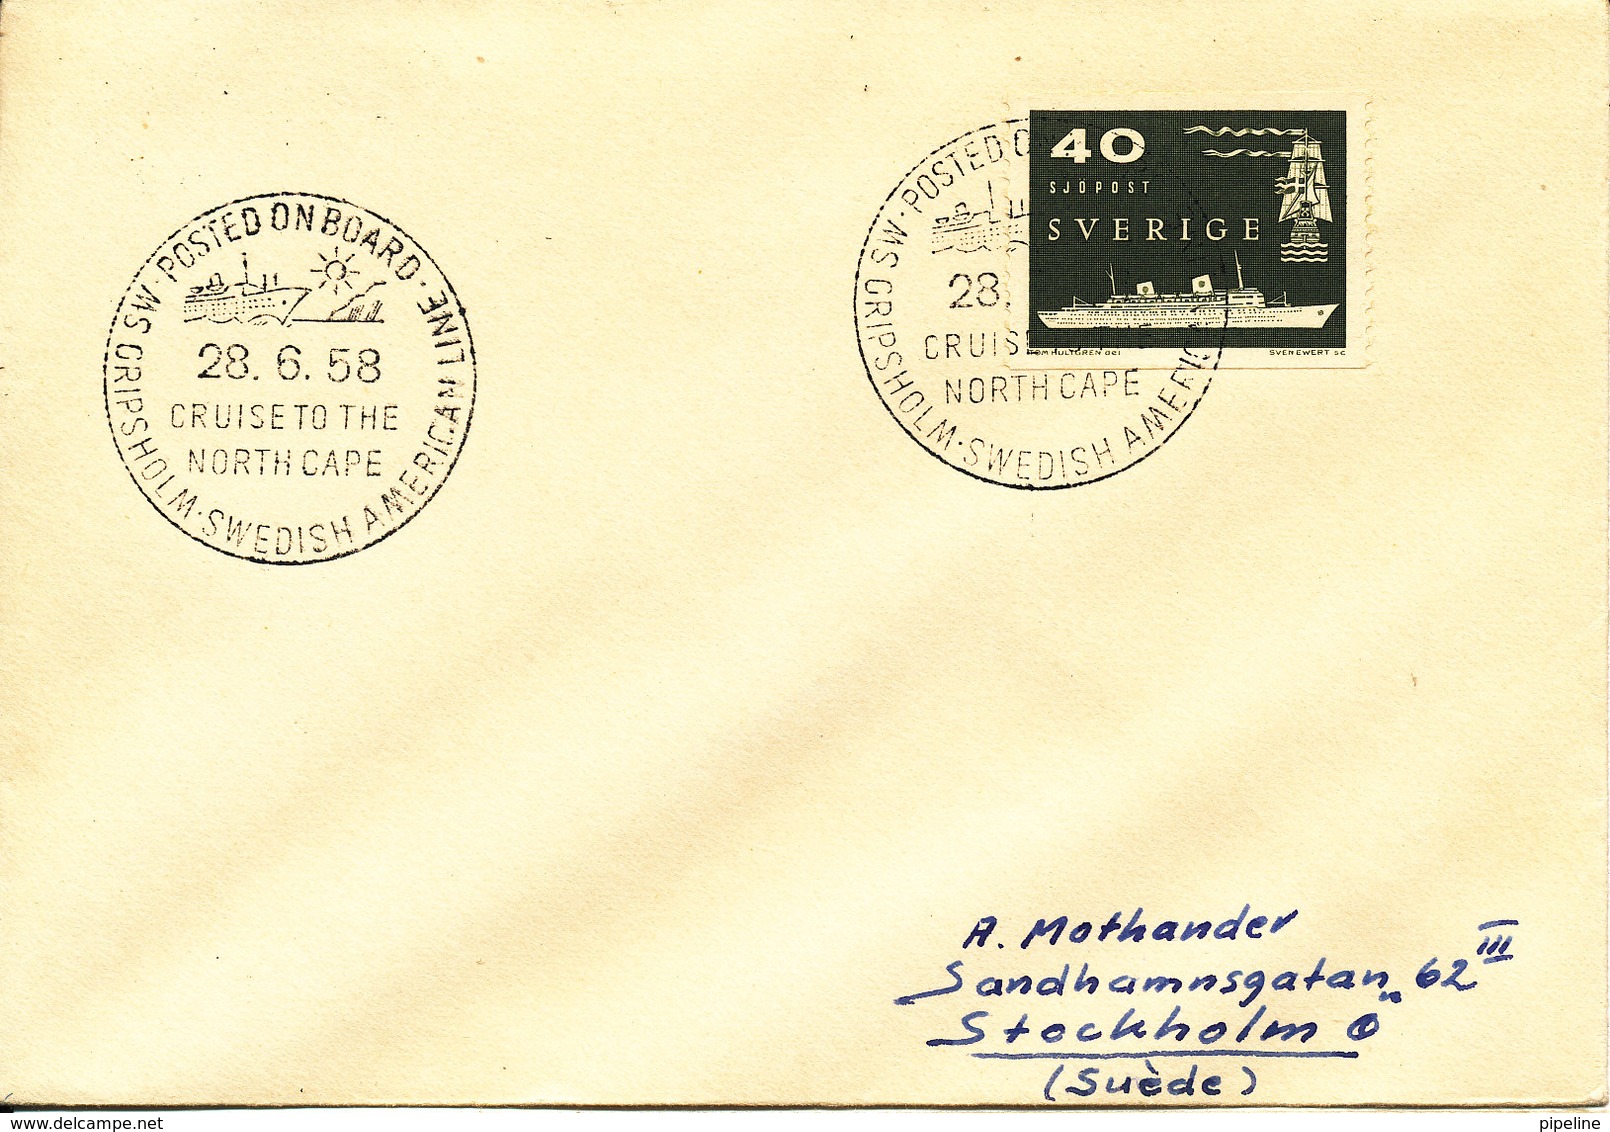 Sweden Ship Cover M/S Gripsholm Swedish American Line Cruise To The North Cape 28-6-1958 Posted On Board - Covers & Documents